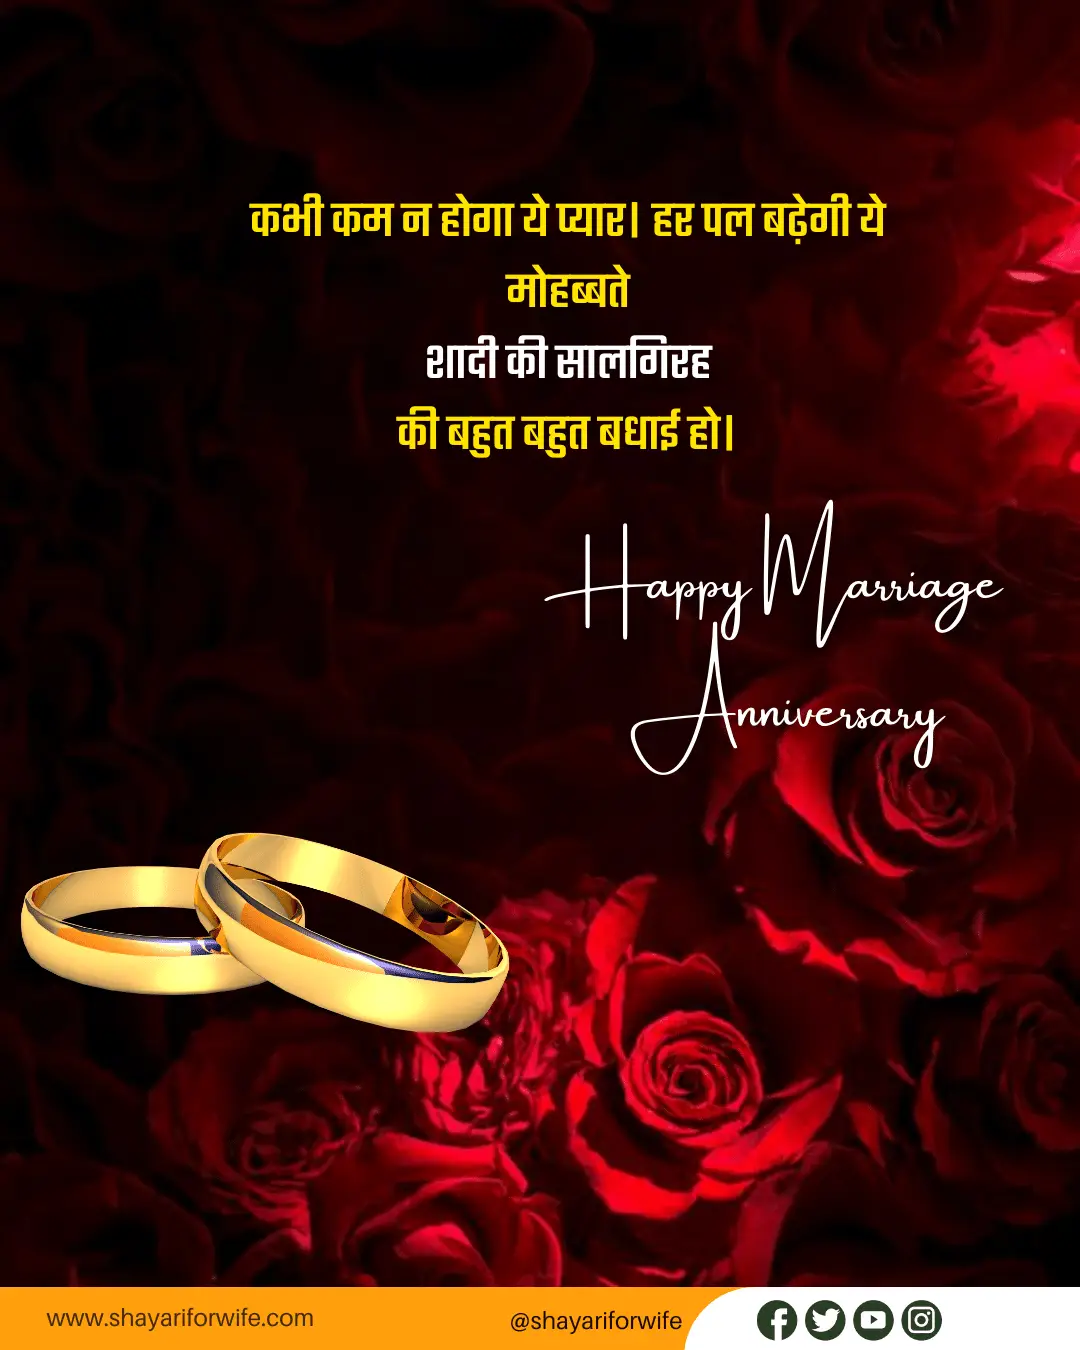 Anniversary Wishes To Wife